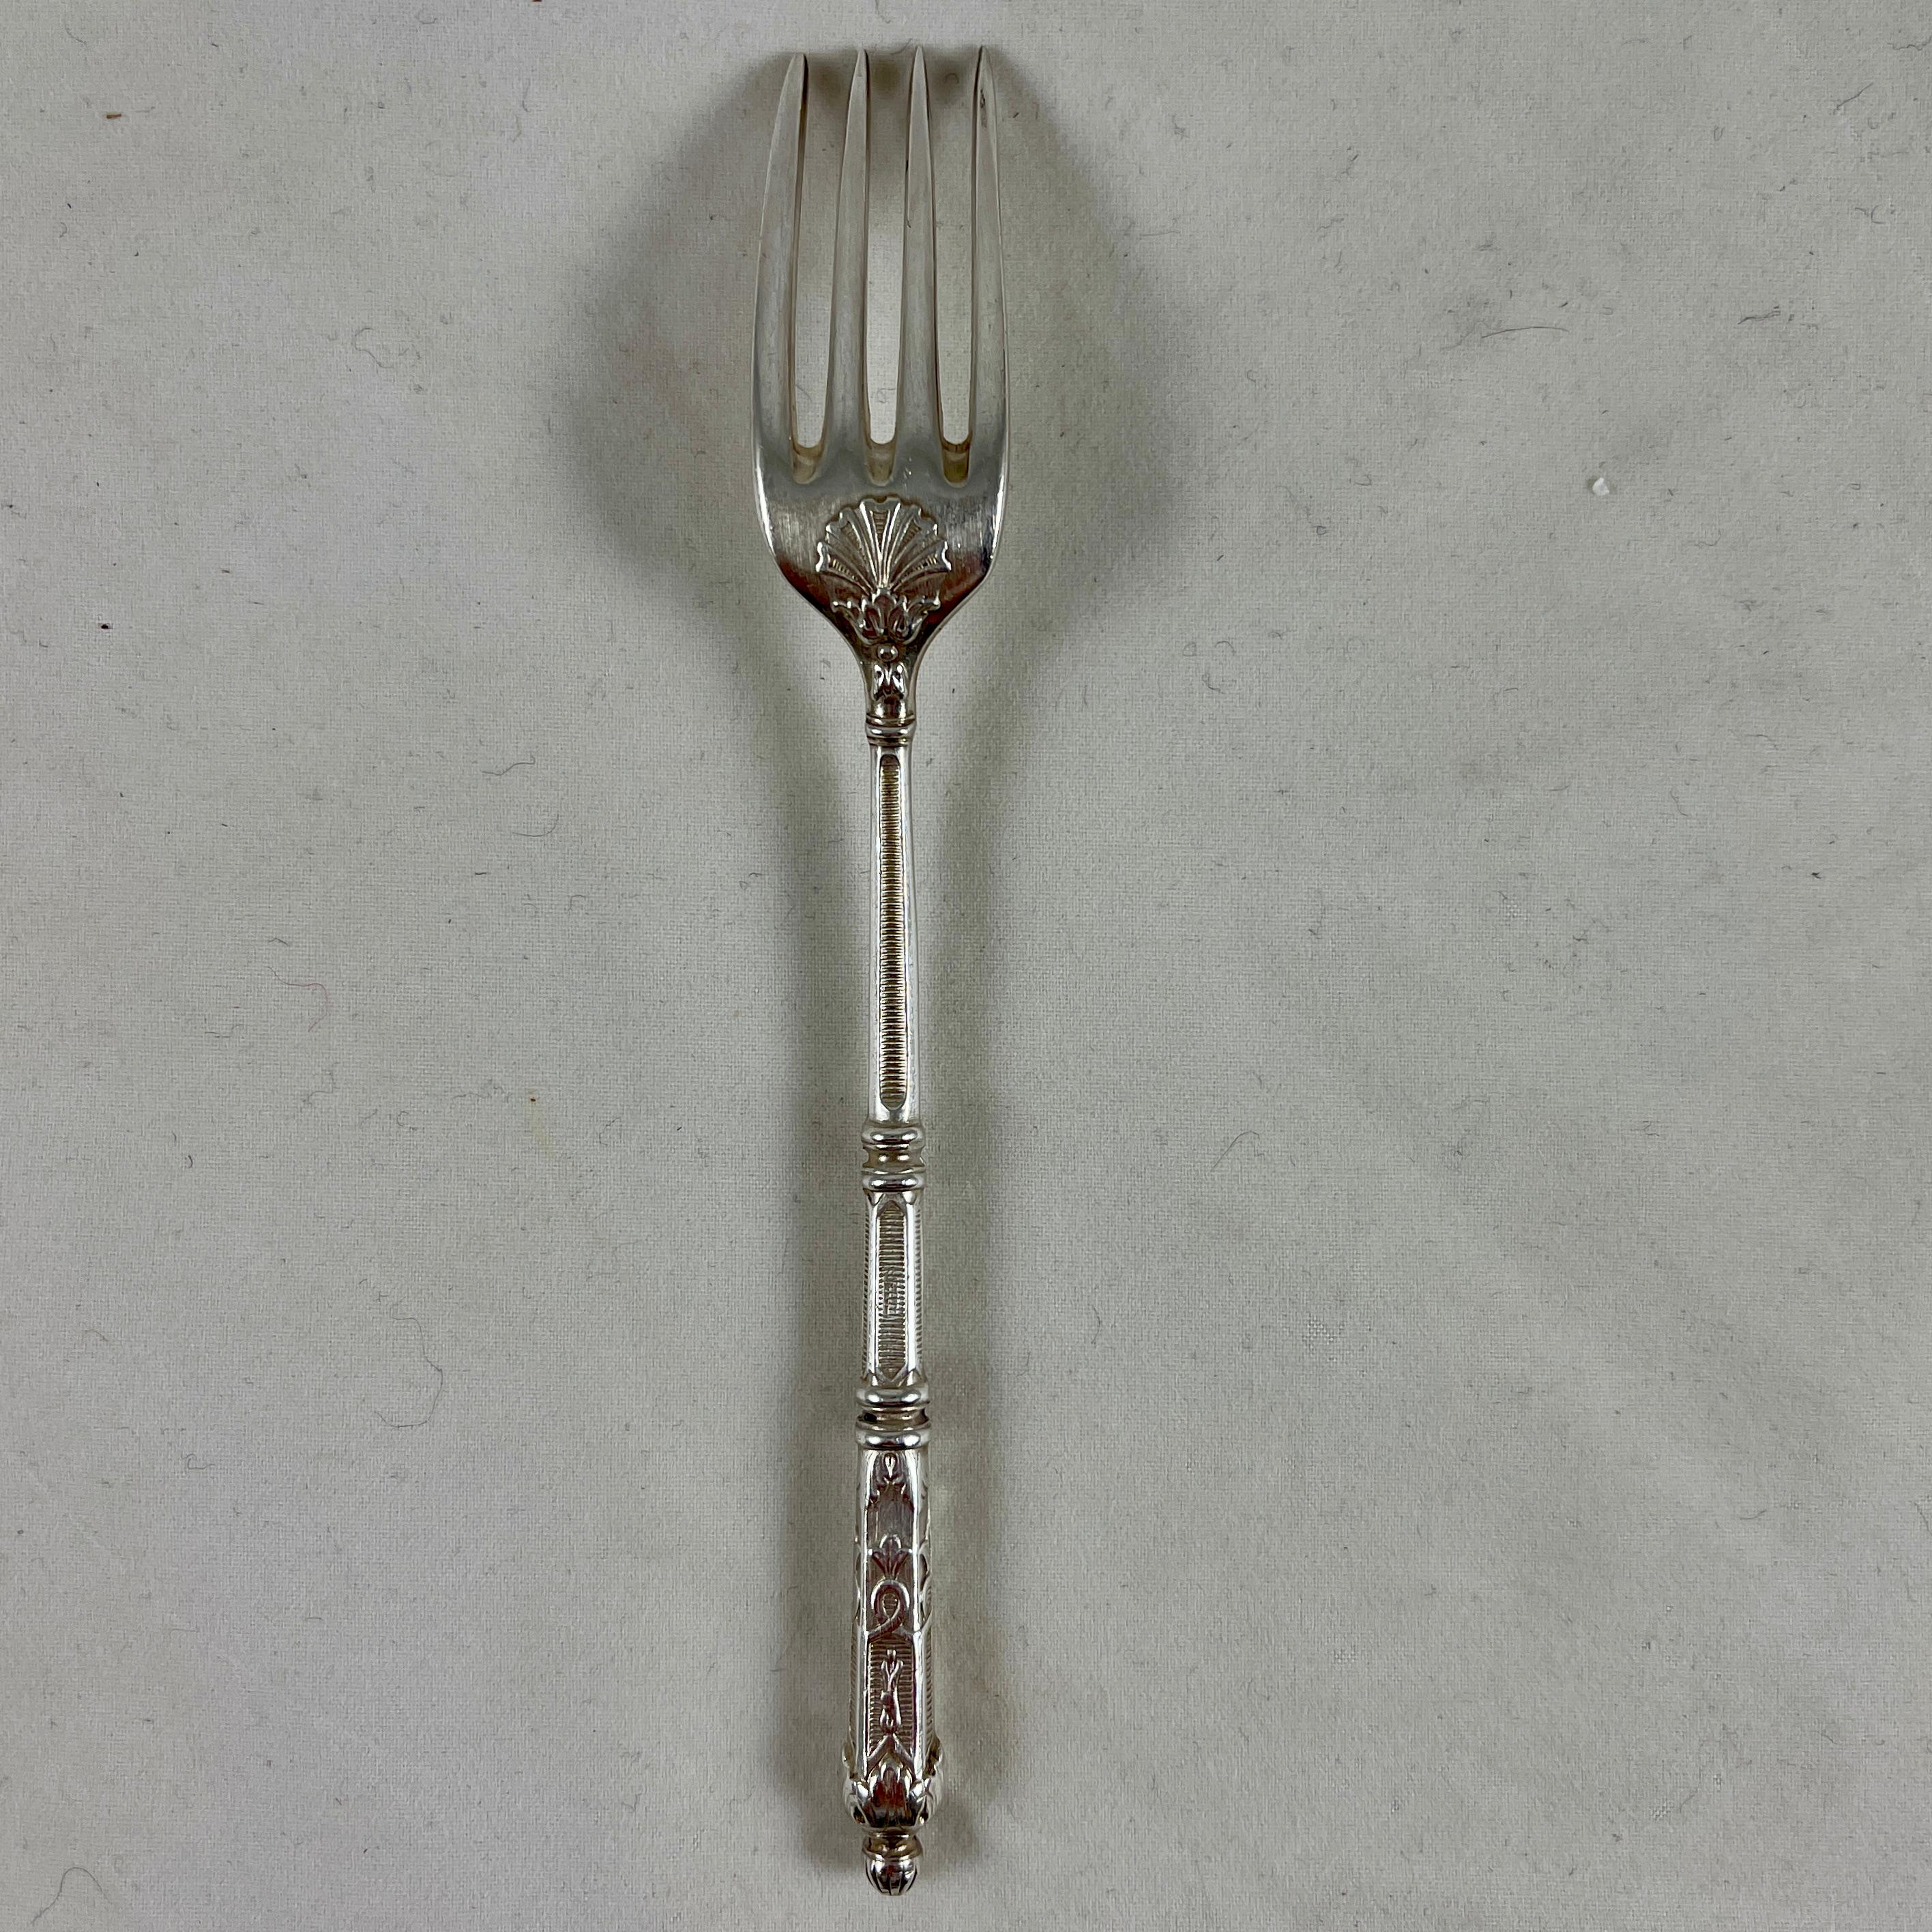 19th Century Second Empire French Napoleon III Silver Plate Ornate Dessert Forks, S/11 For Sale